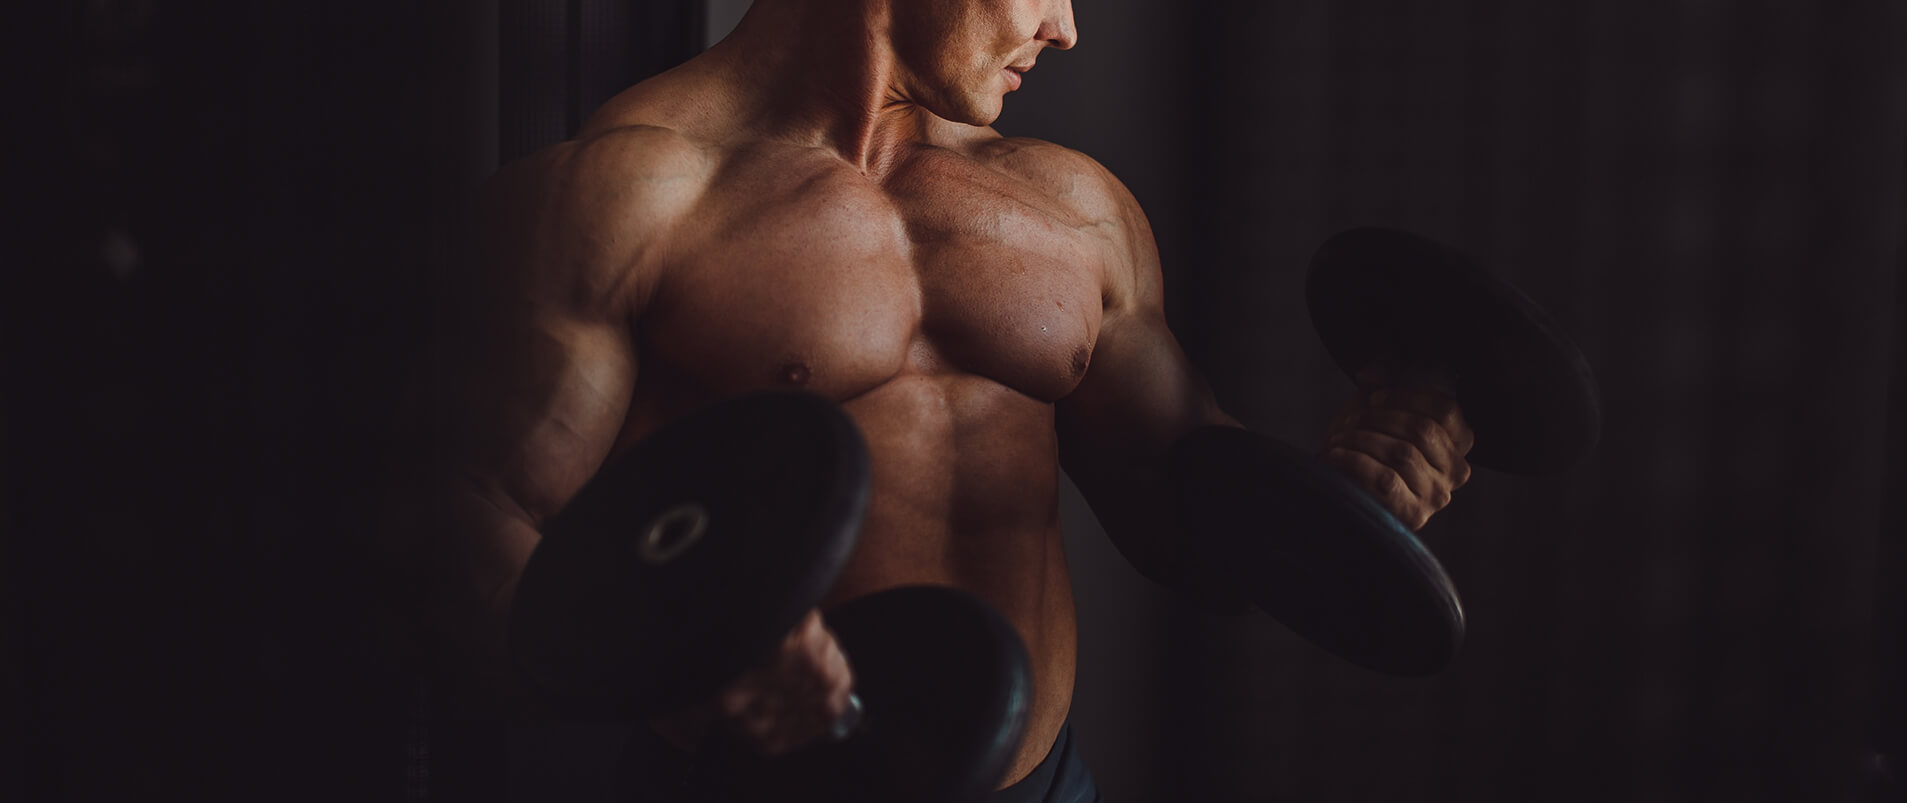 Genotropin 12 mg: Exploring Its Impact on Muscle Growth in Bodybuilding